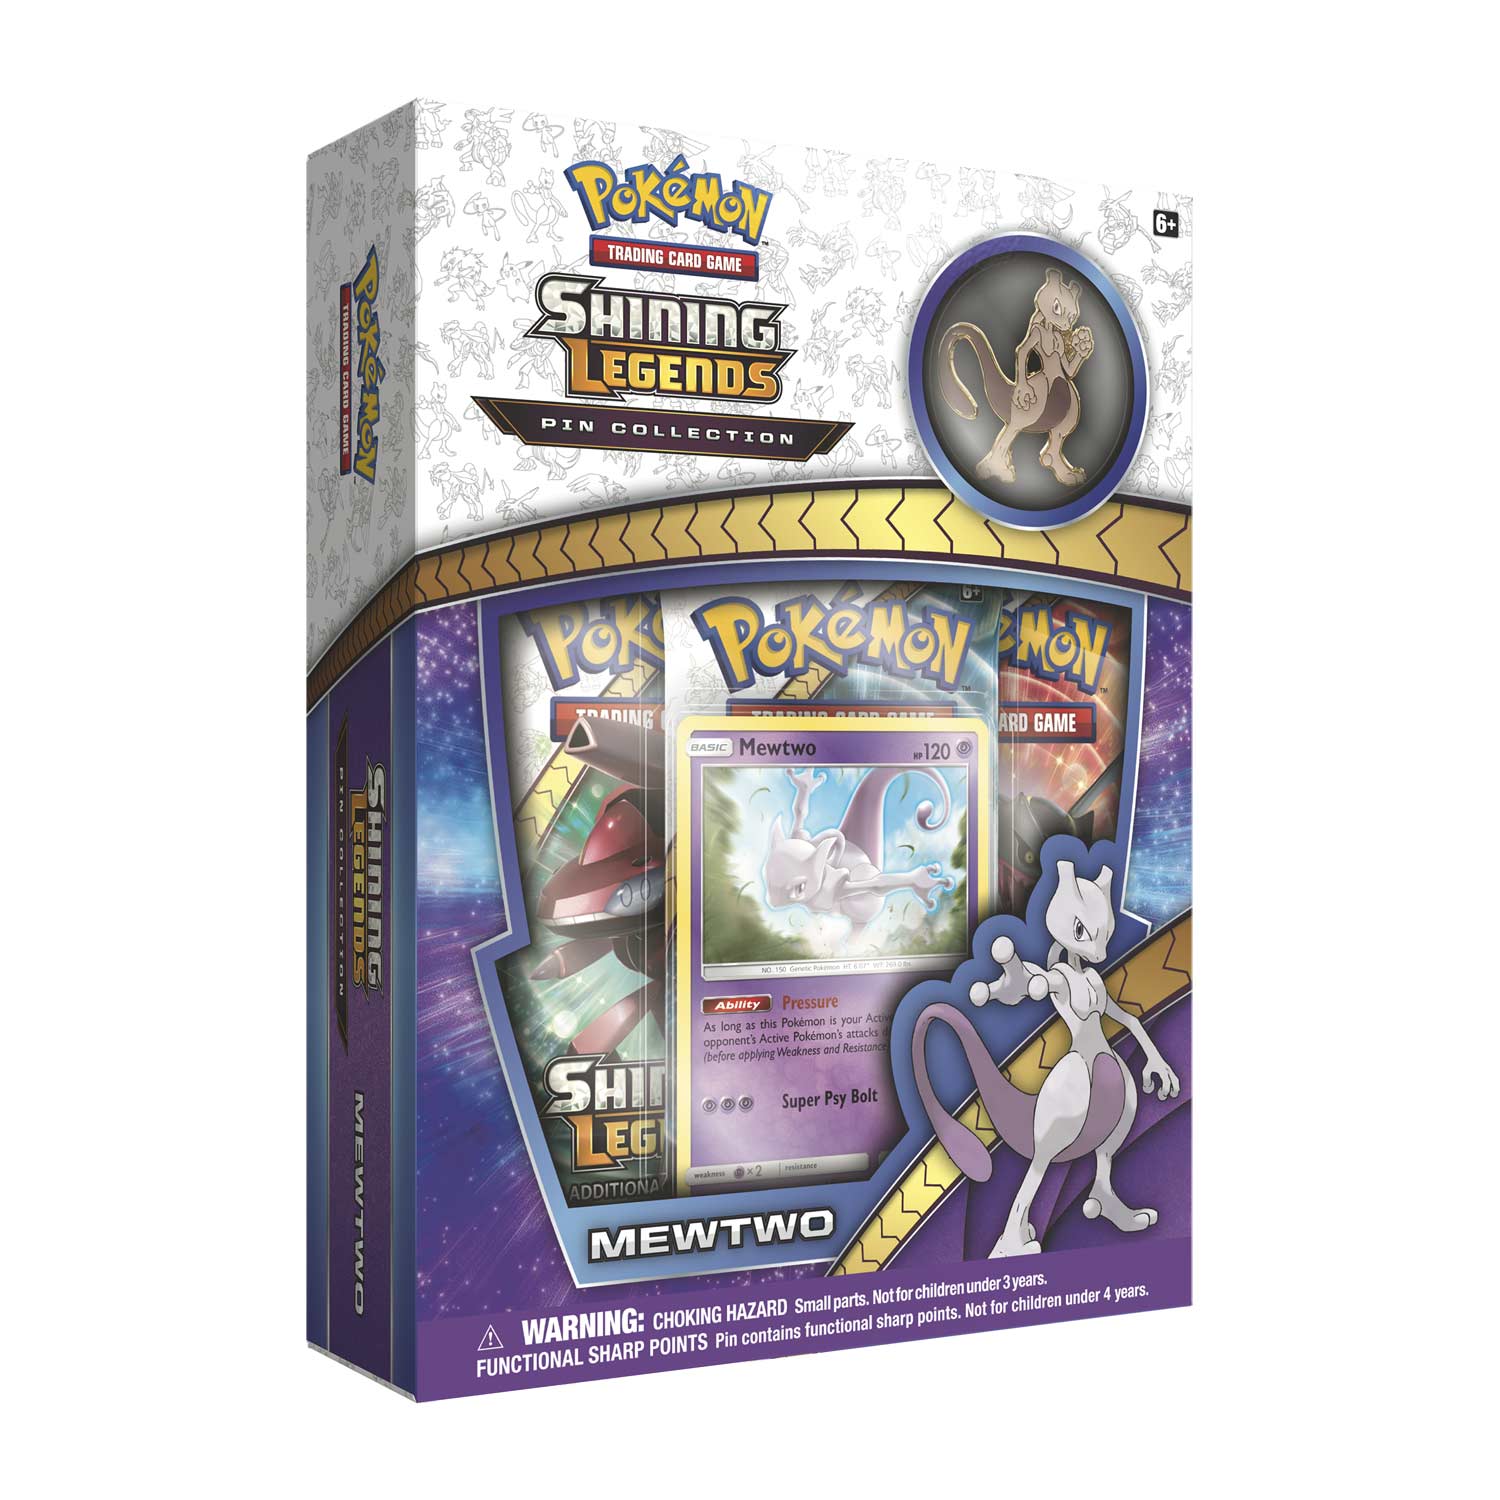 Details about   Pokemon Trading Card Game ONLINE code SHINING LEGENDS PIN COLL MEWTWO x1 EMAIL 